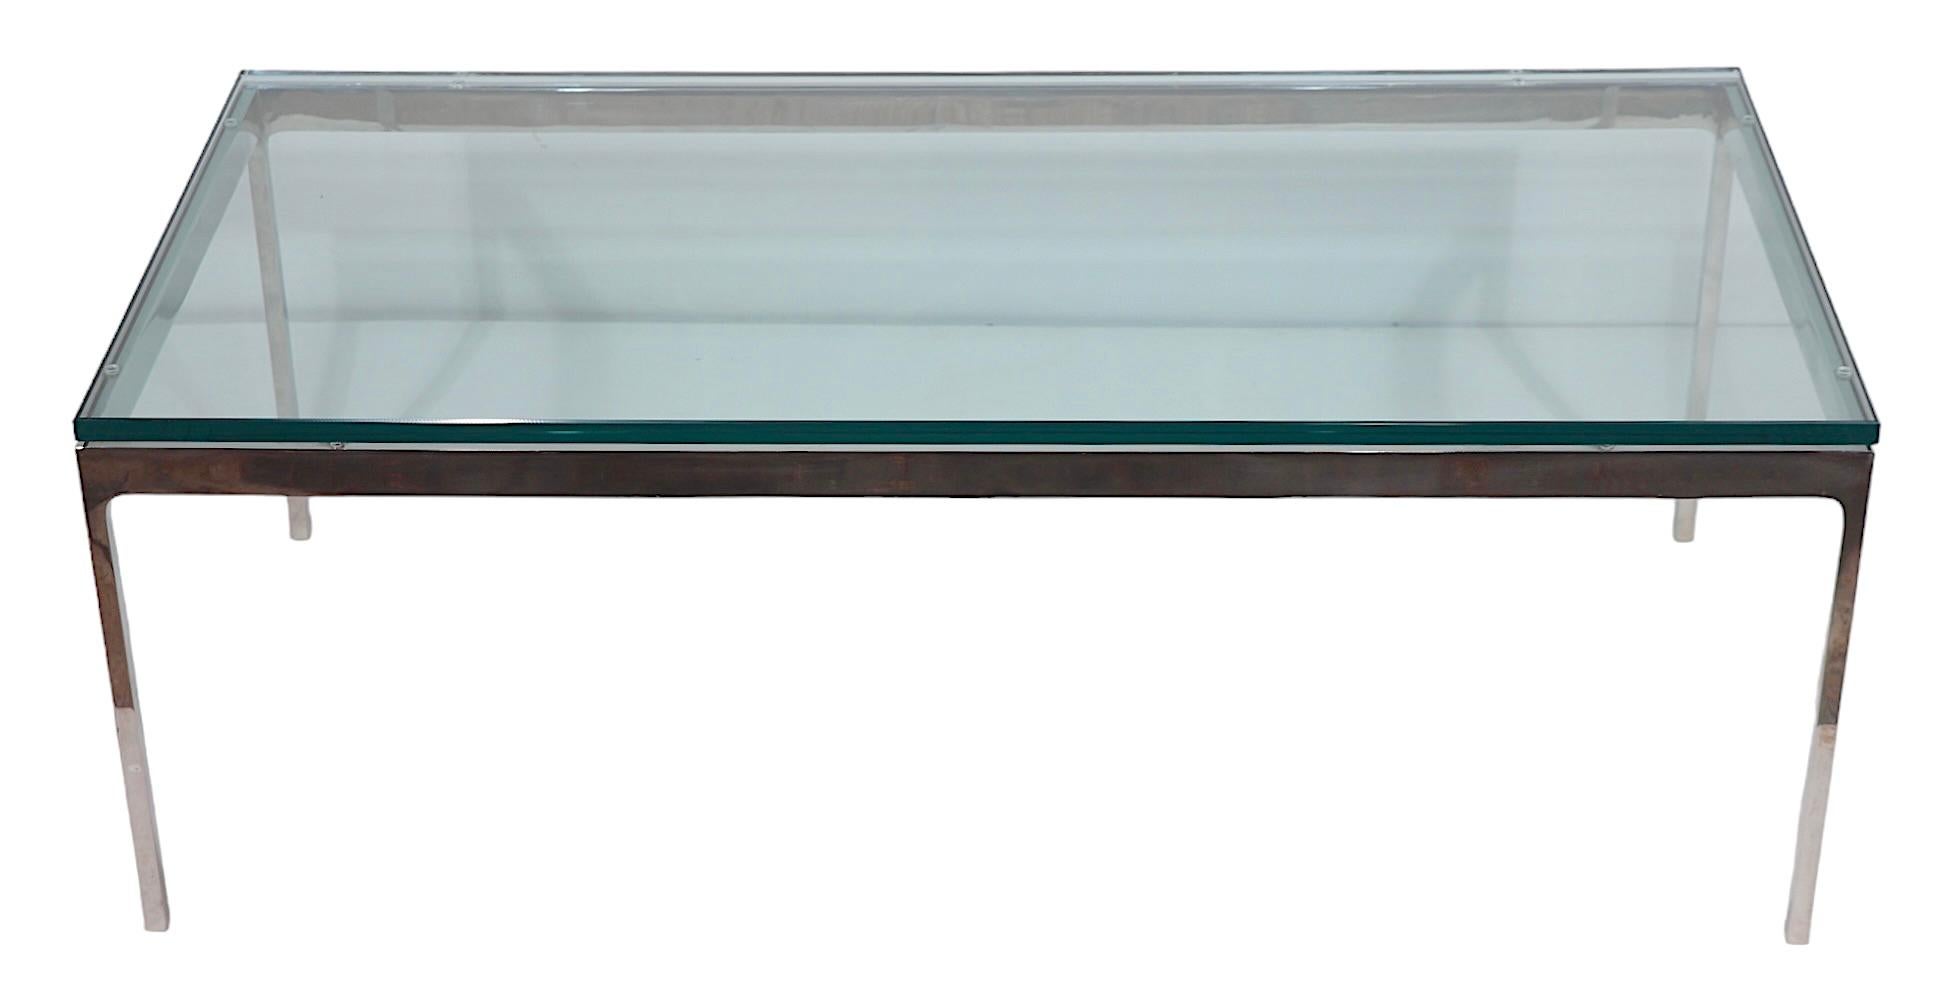 Exceptional International Bauhaus Style coffee table designed by Nicos Zographos circa 1970's. From his iconic 35 series group, this is the not often seen rectangular version, it is in very fine, clean and ready to use condition. We have replaced